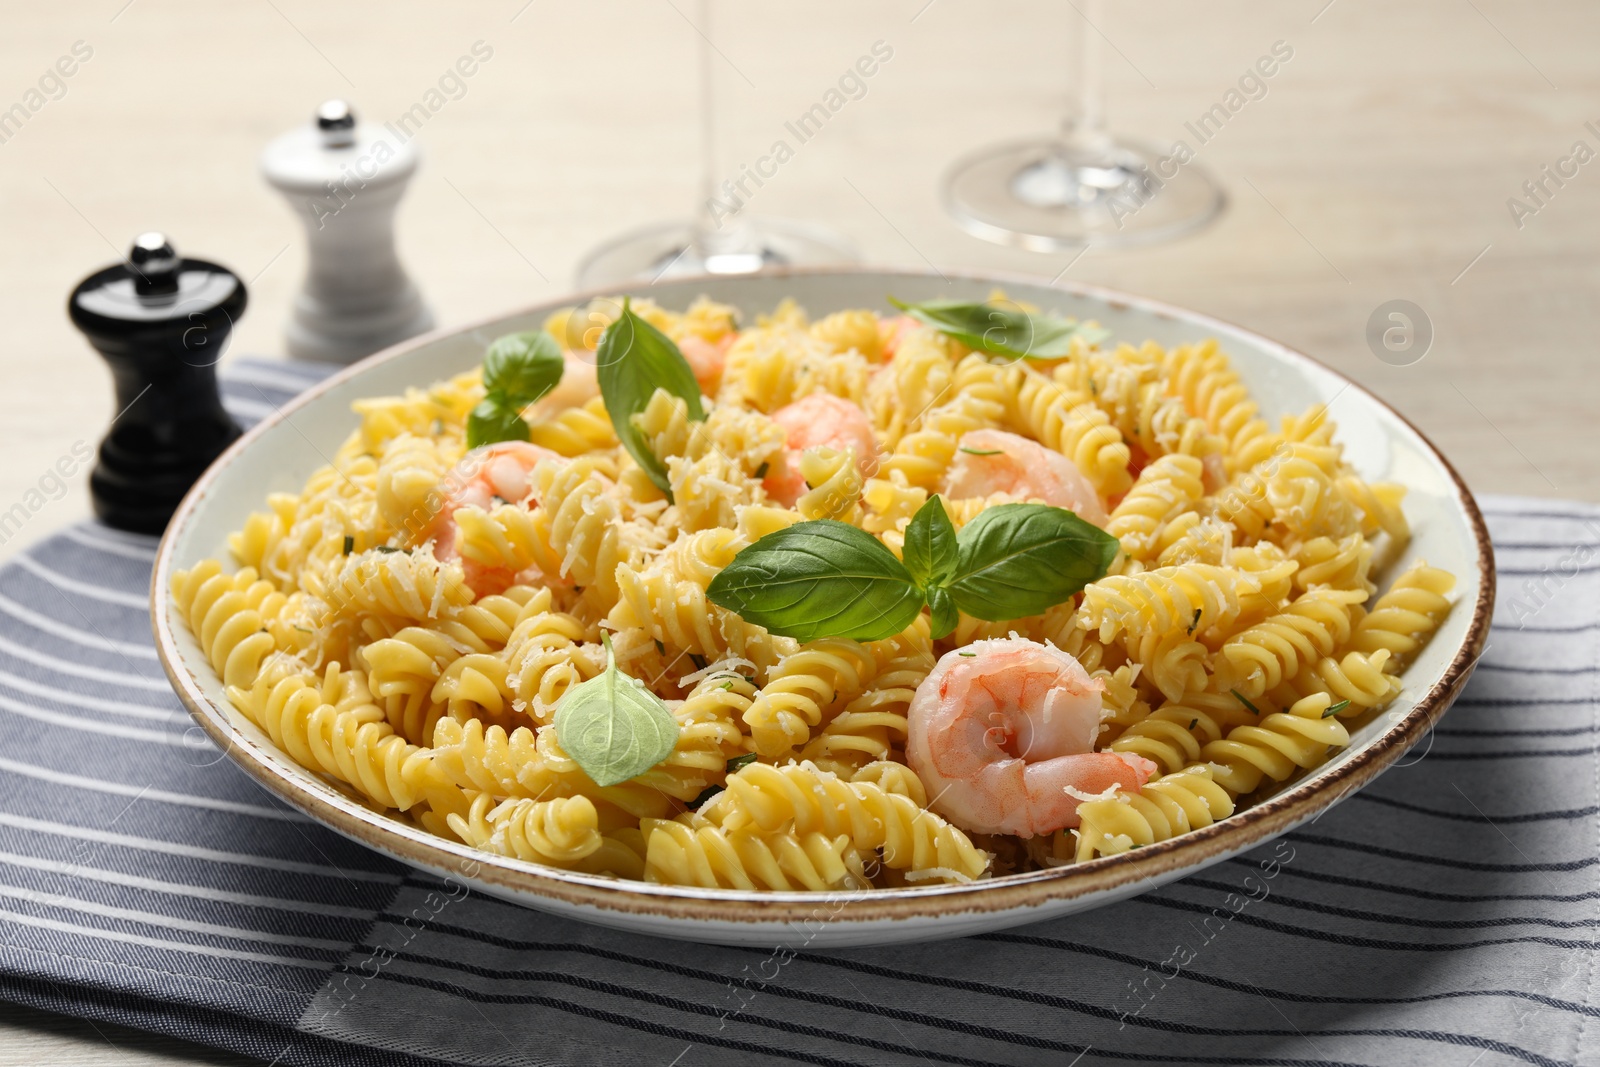 Photo of Plate of delicious pasta with shrimps, basil and parmesan cheese on table, closeup